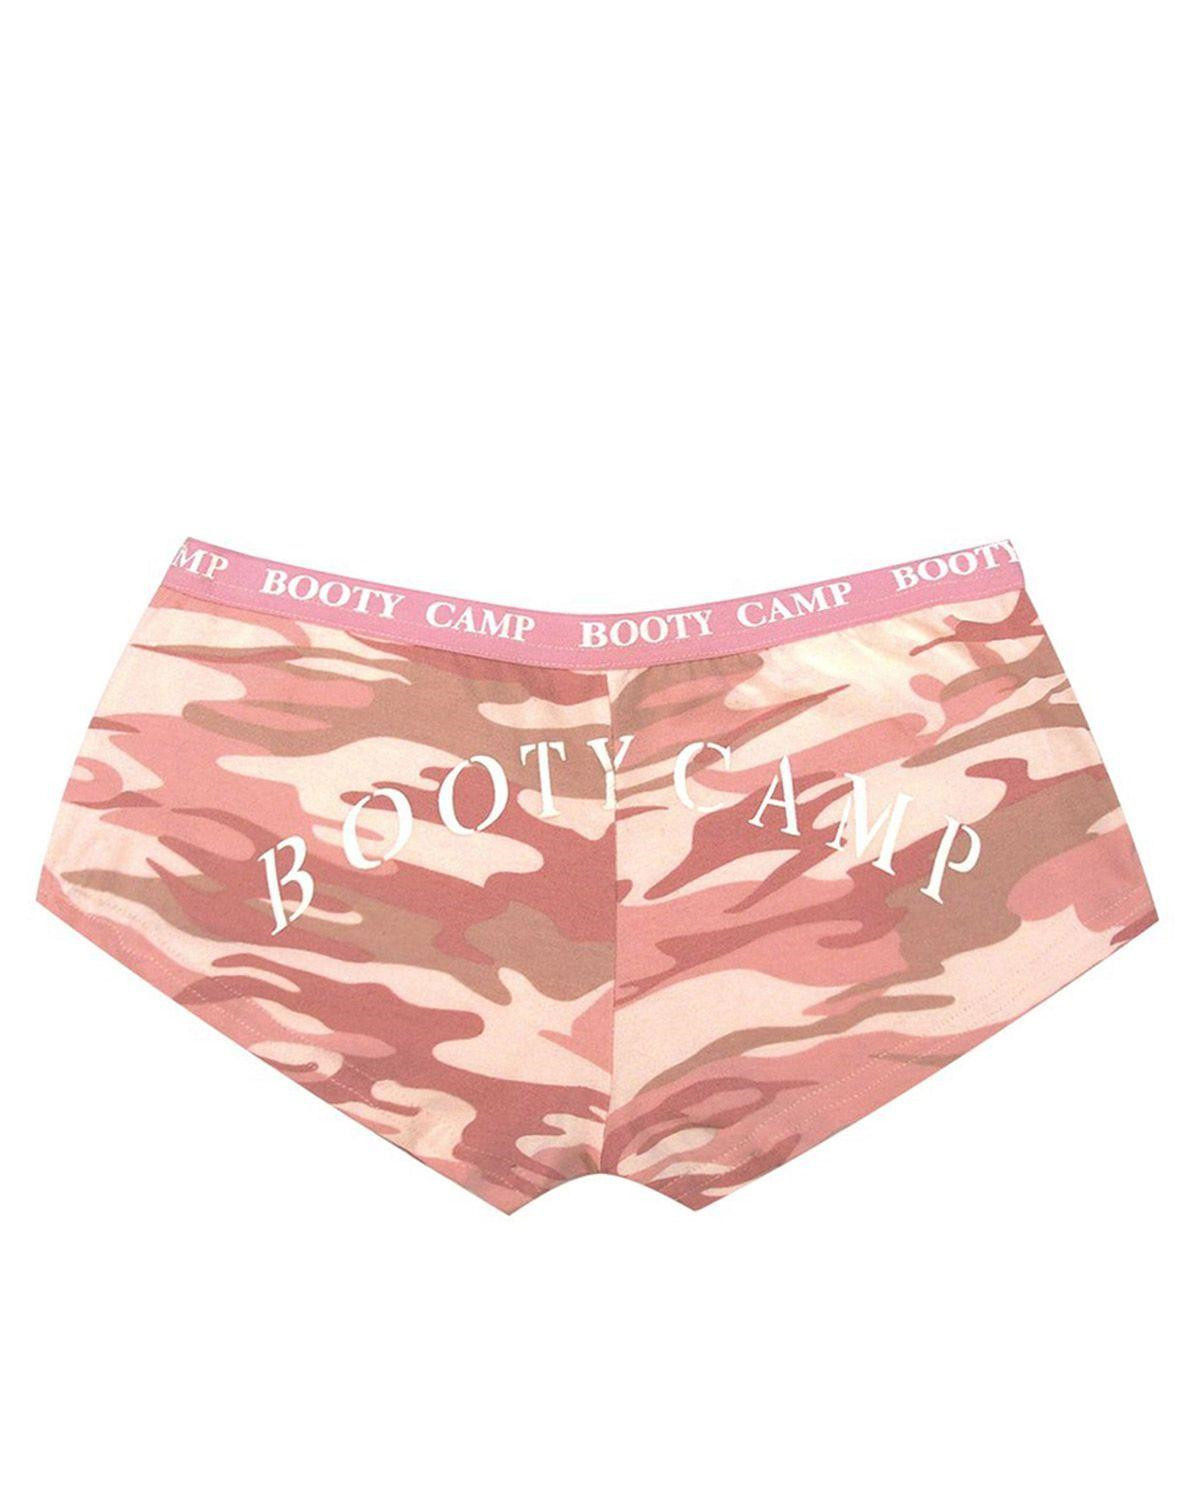 #2 - Rothco Trusser - 'Booty Camp' (Pink Camo, M)